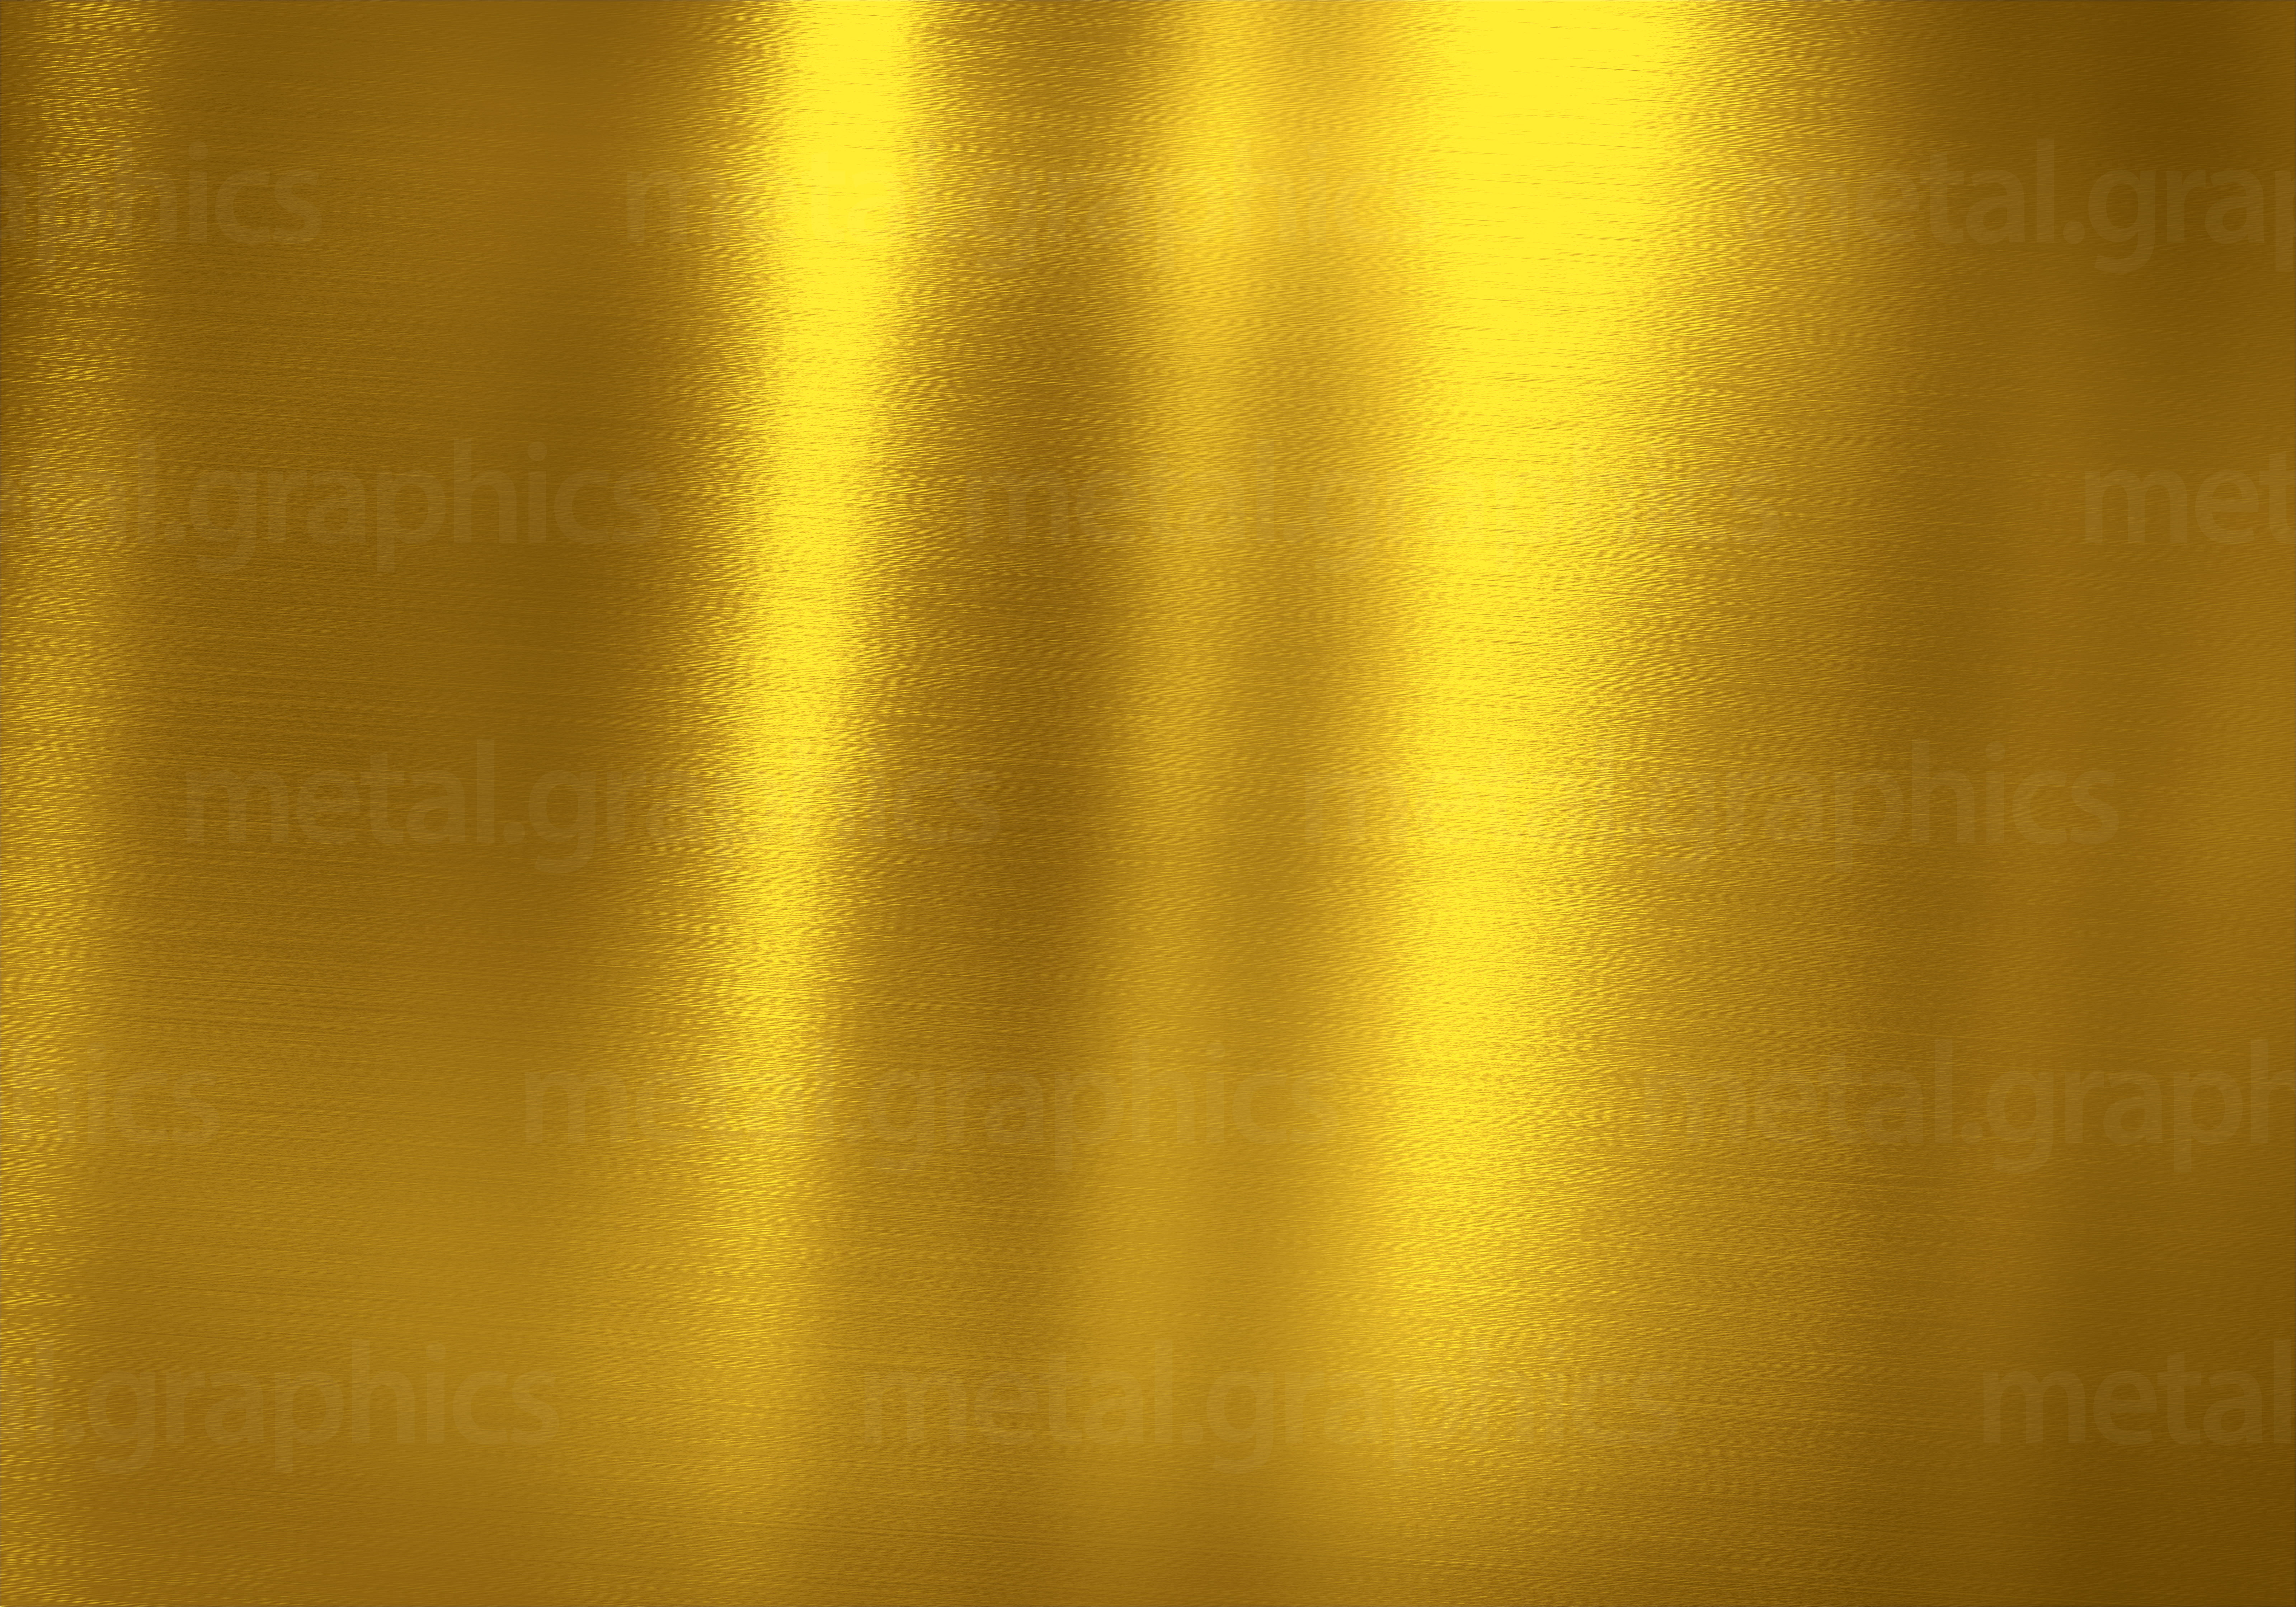 Metallic Gold Graphics PPT Backgrounds